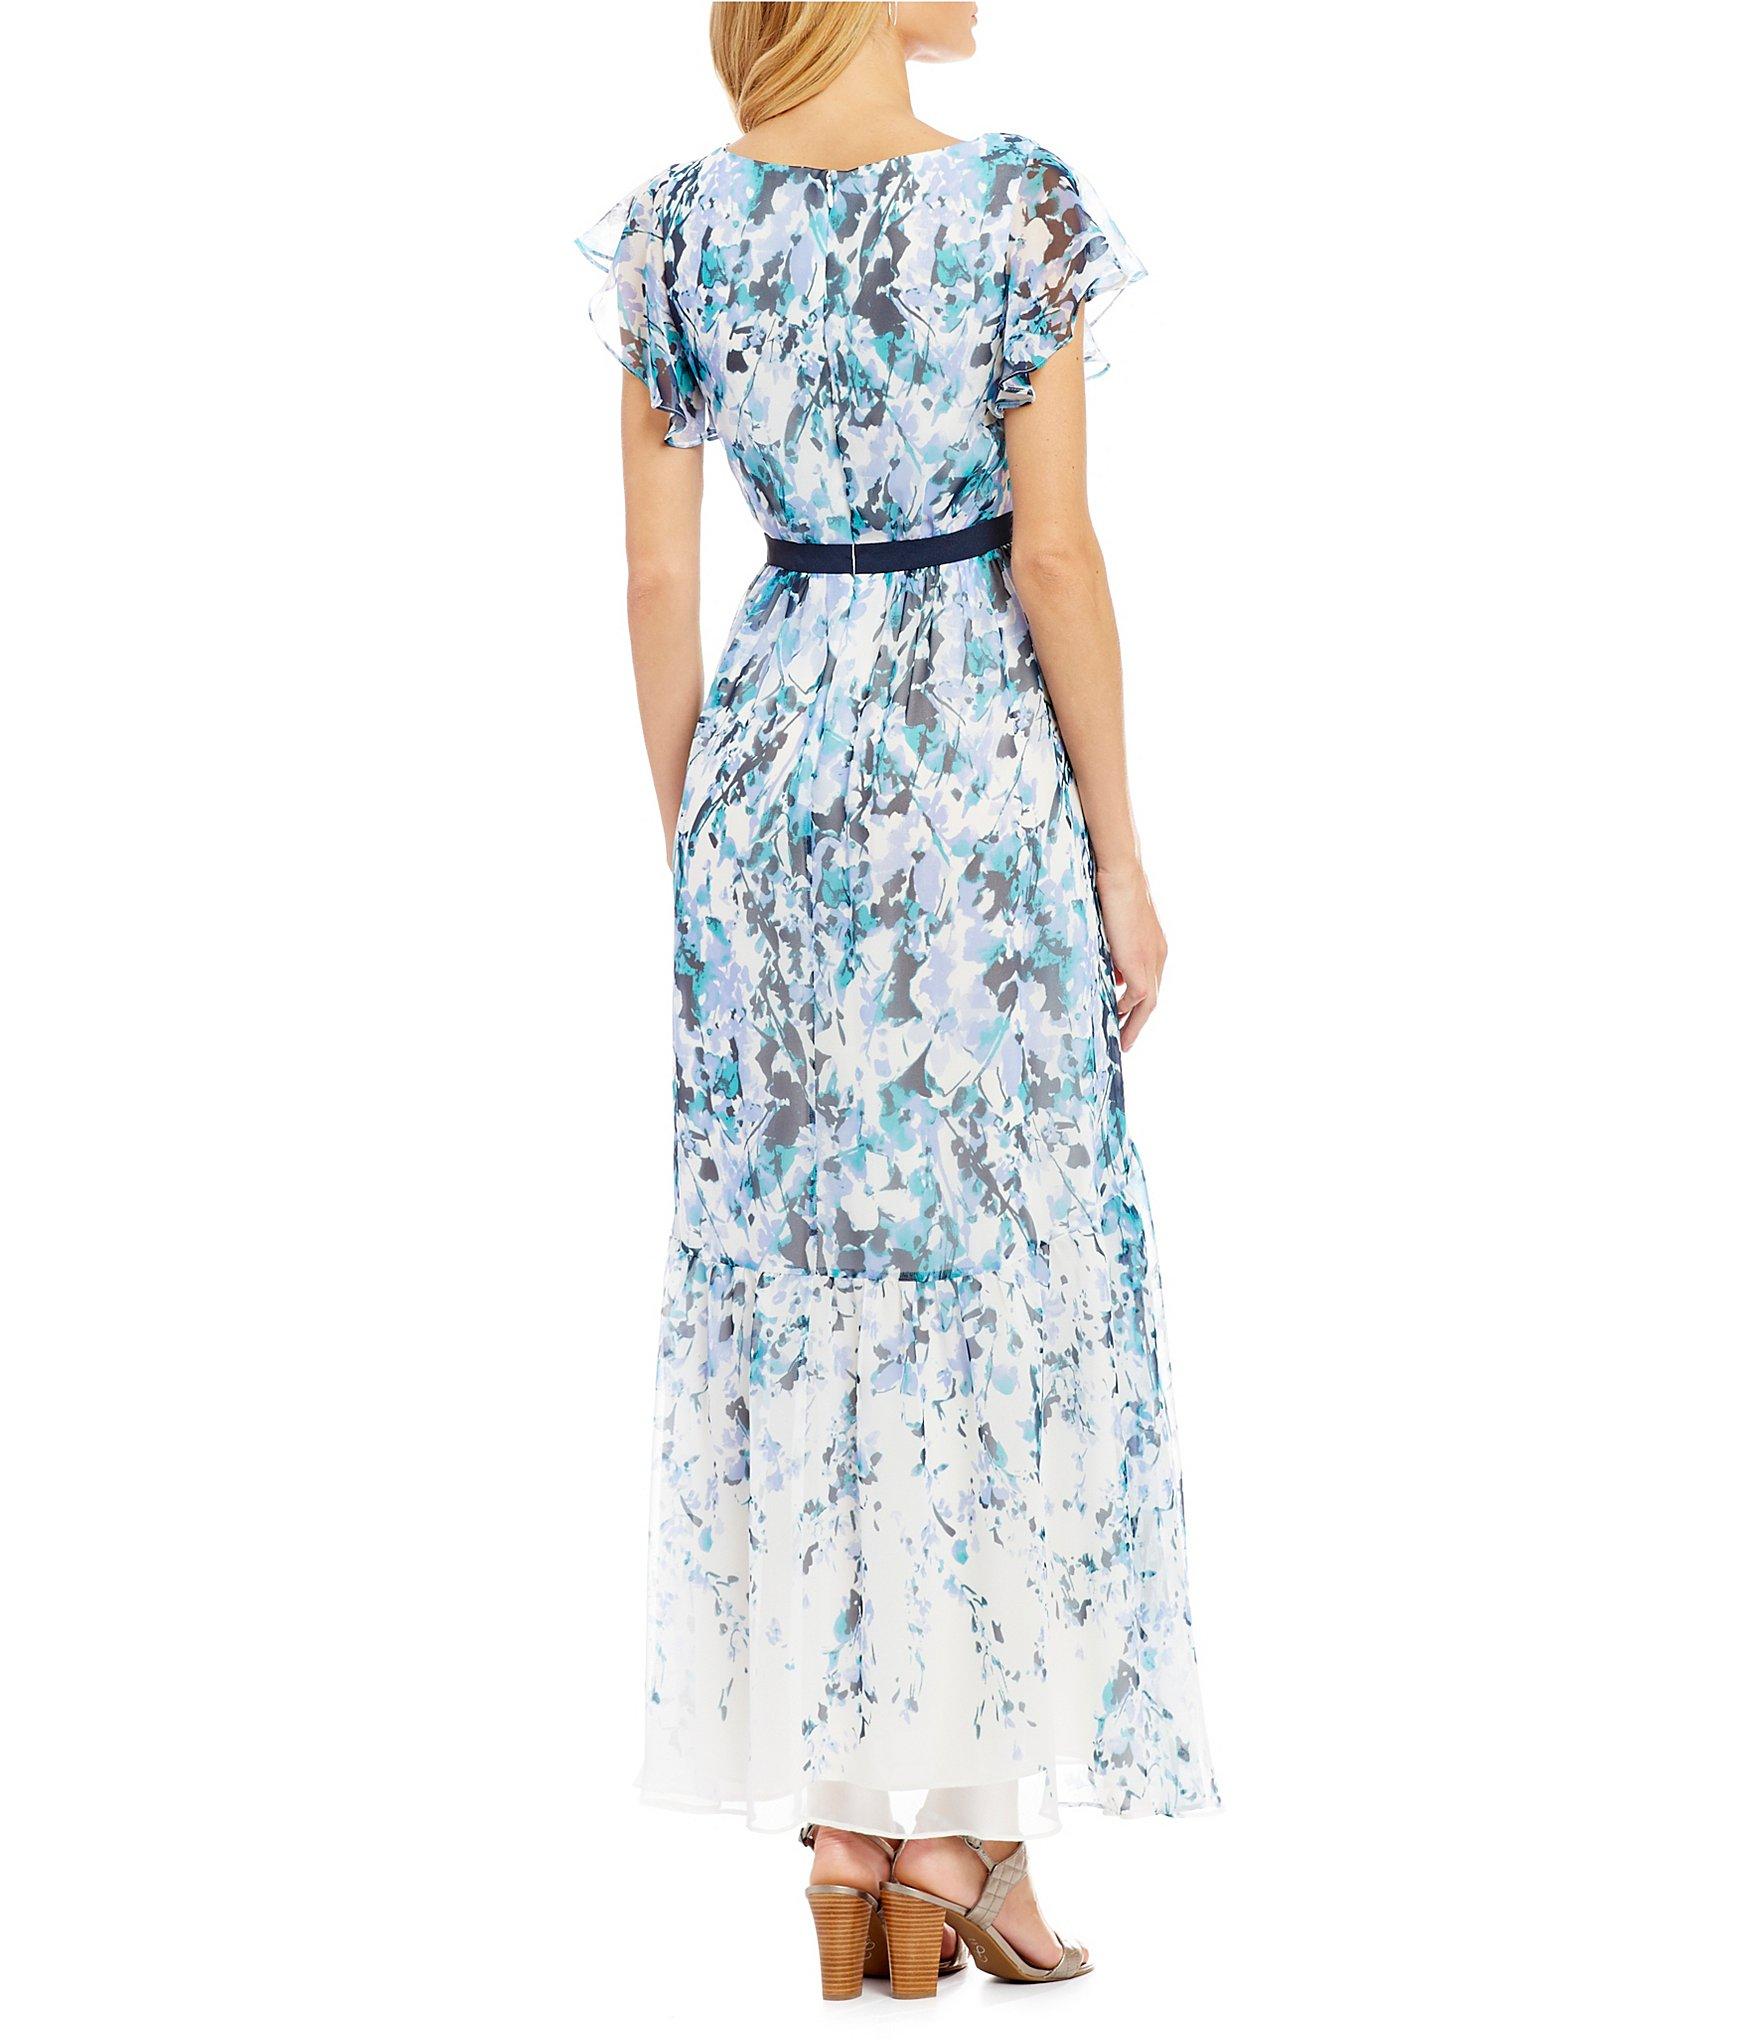 Adrianna Papell Chiffon Floral Cascade Printed Maxi Dress in Blue - Lyst